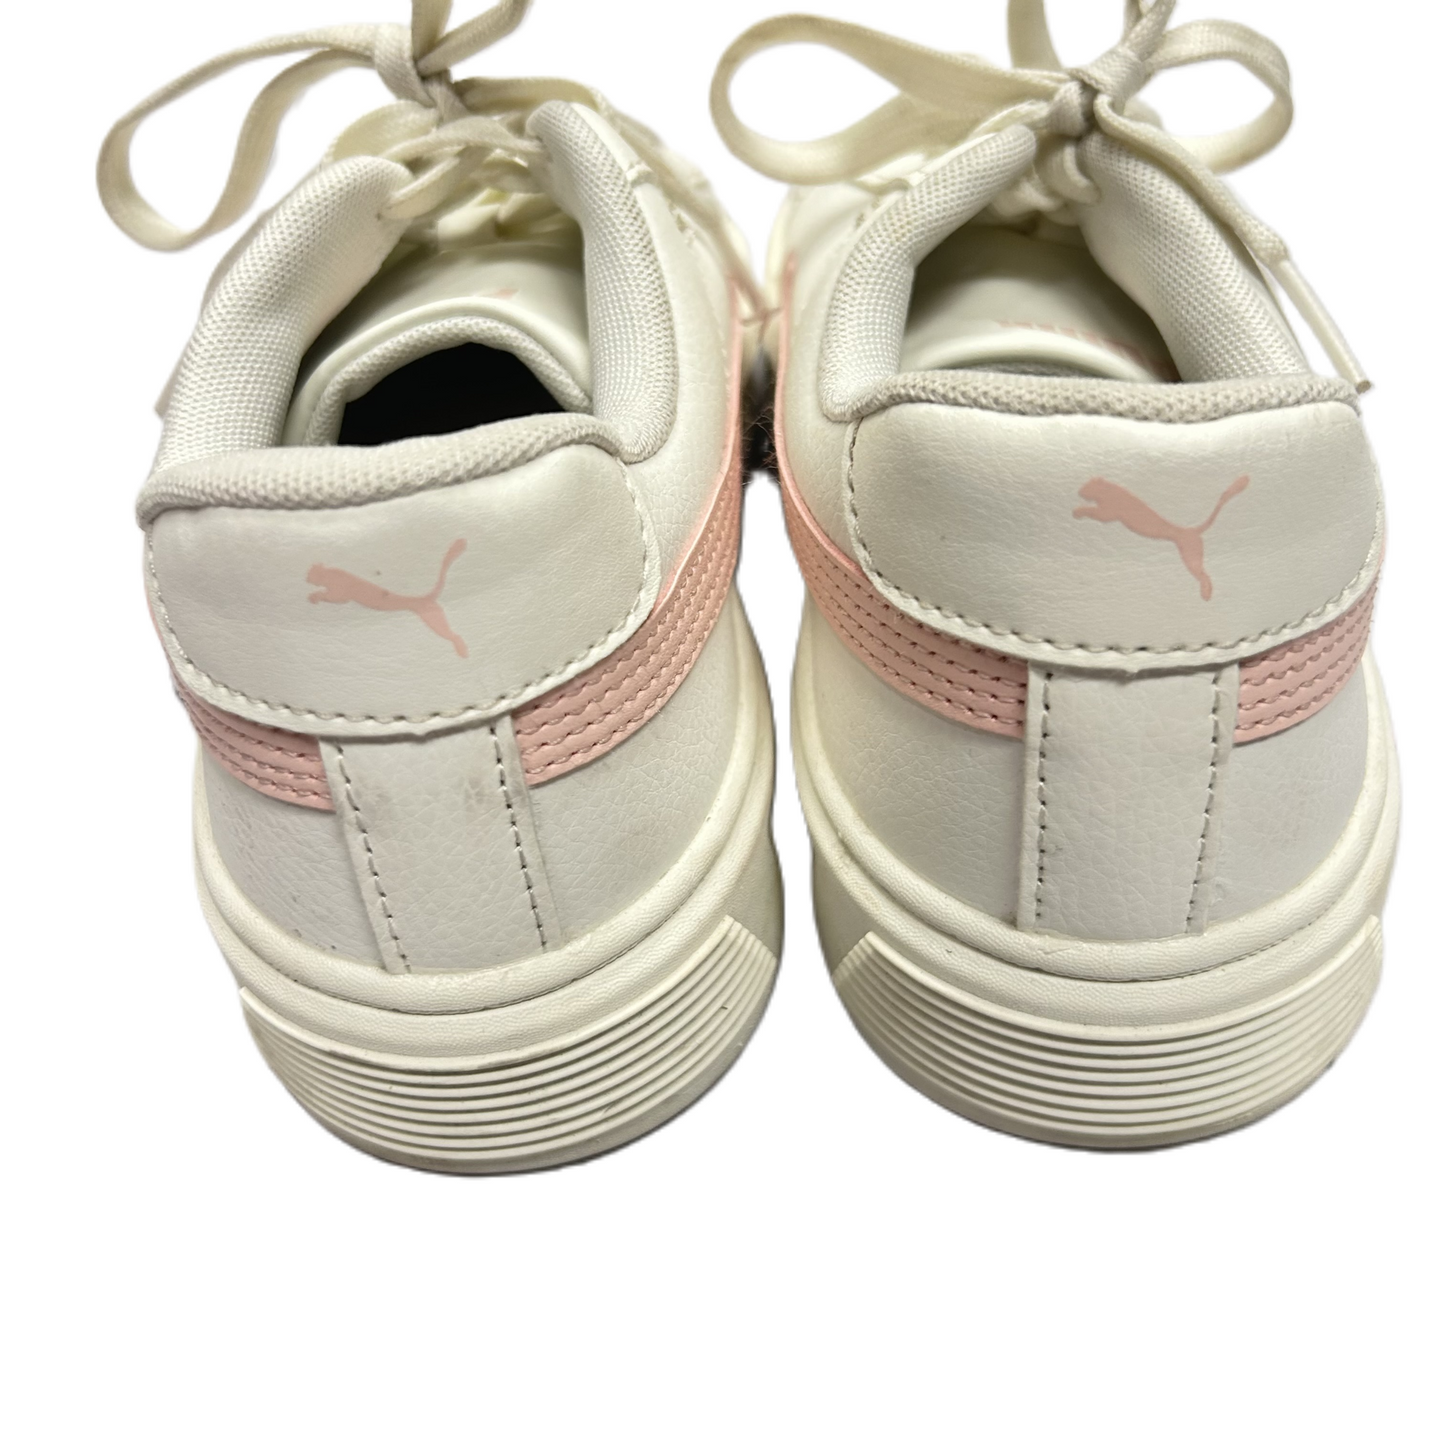 Pink & White Shoes Sneakers Platform By Puma, Size: 8